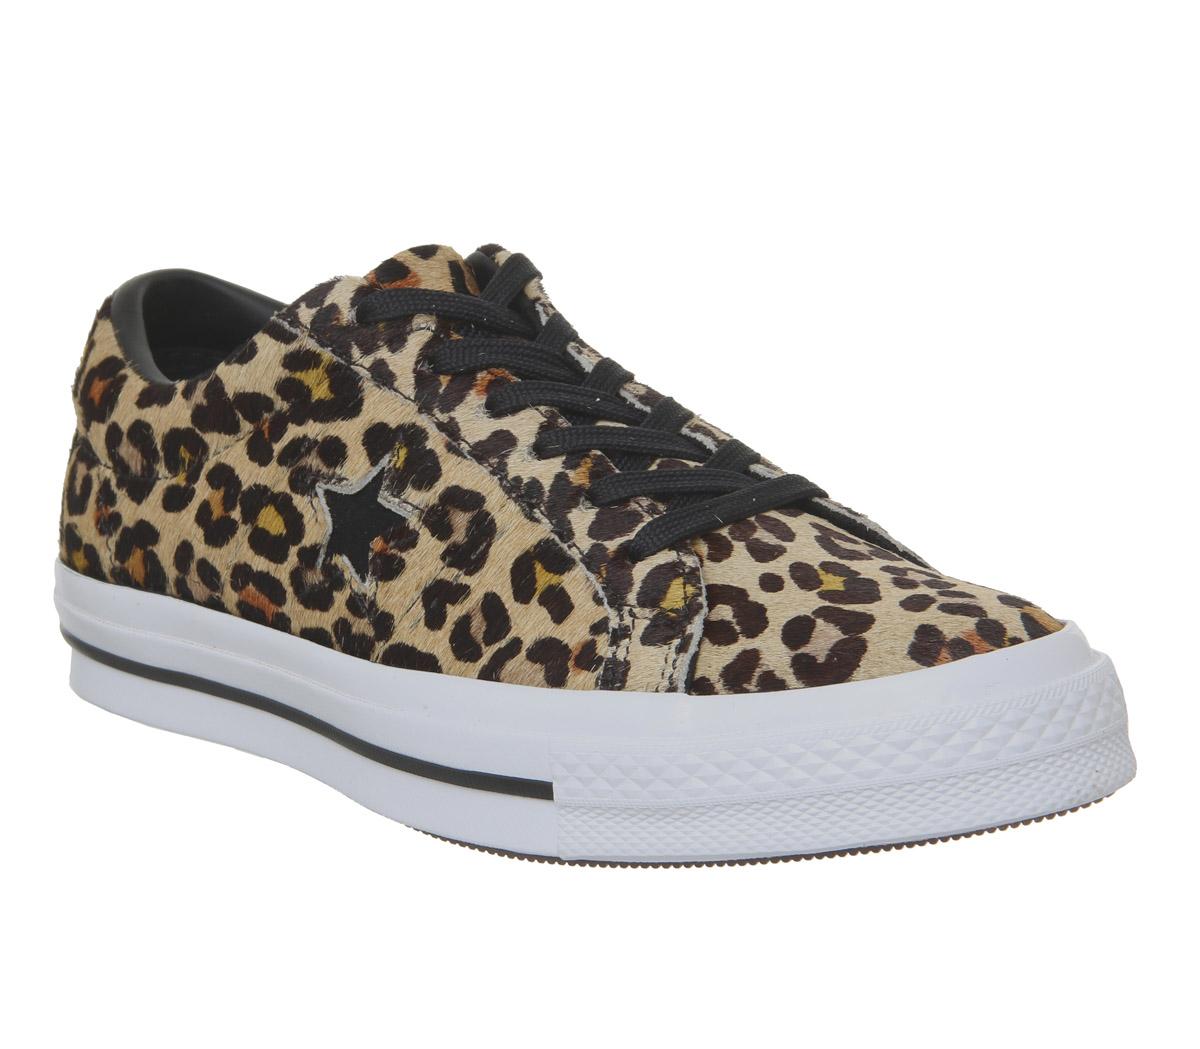 converse one star pony hair leopard print trainers